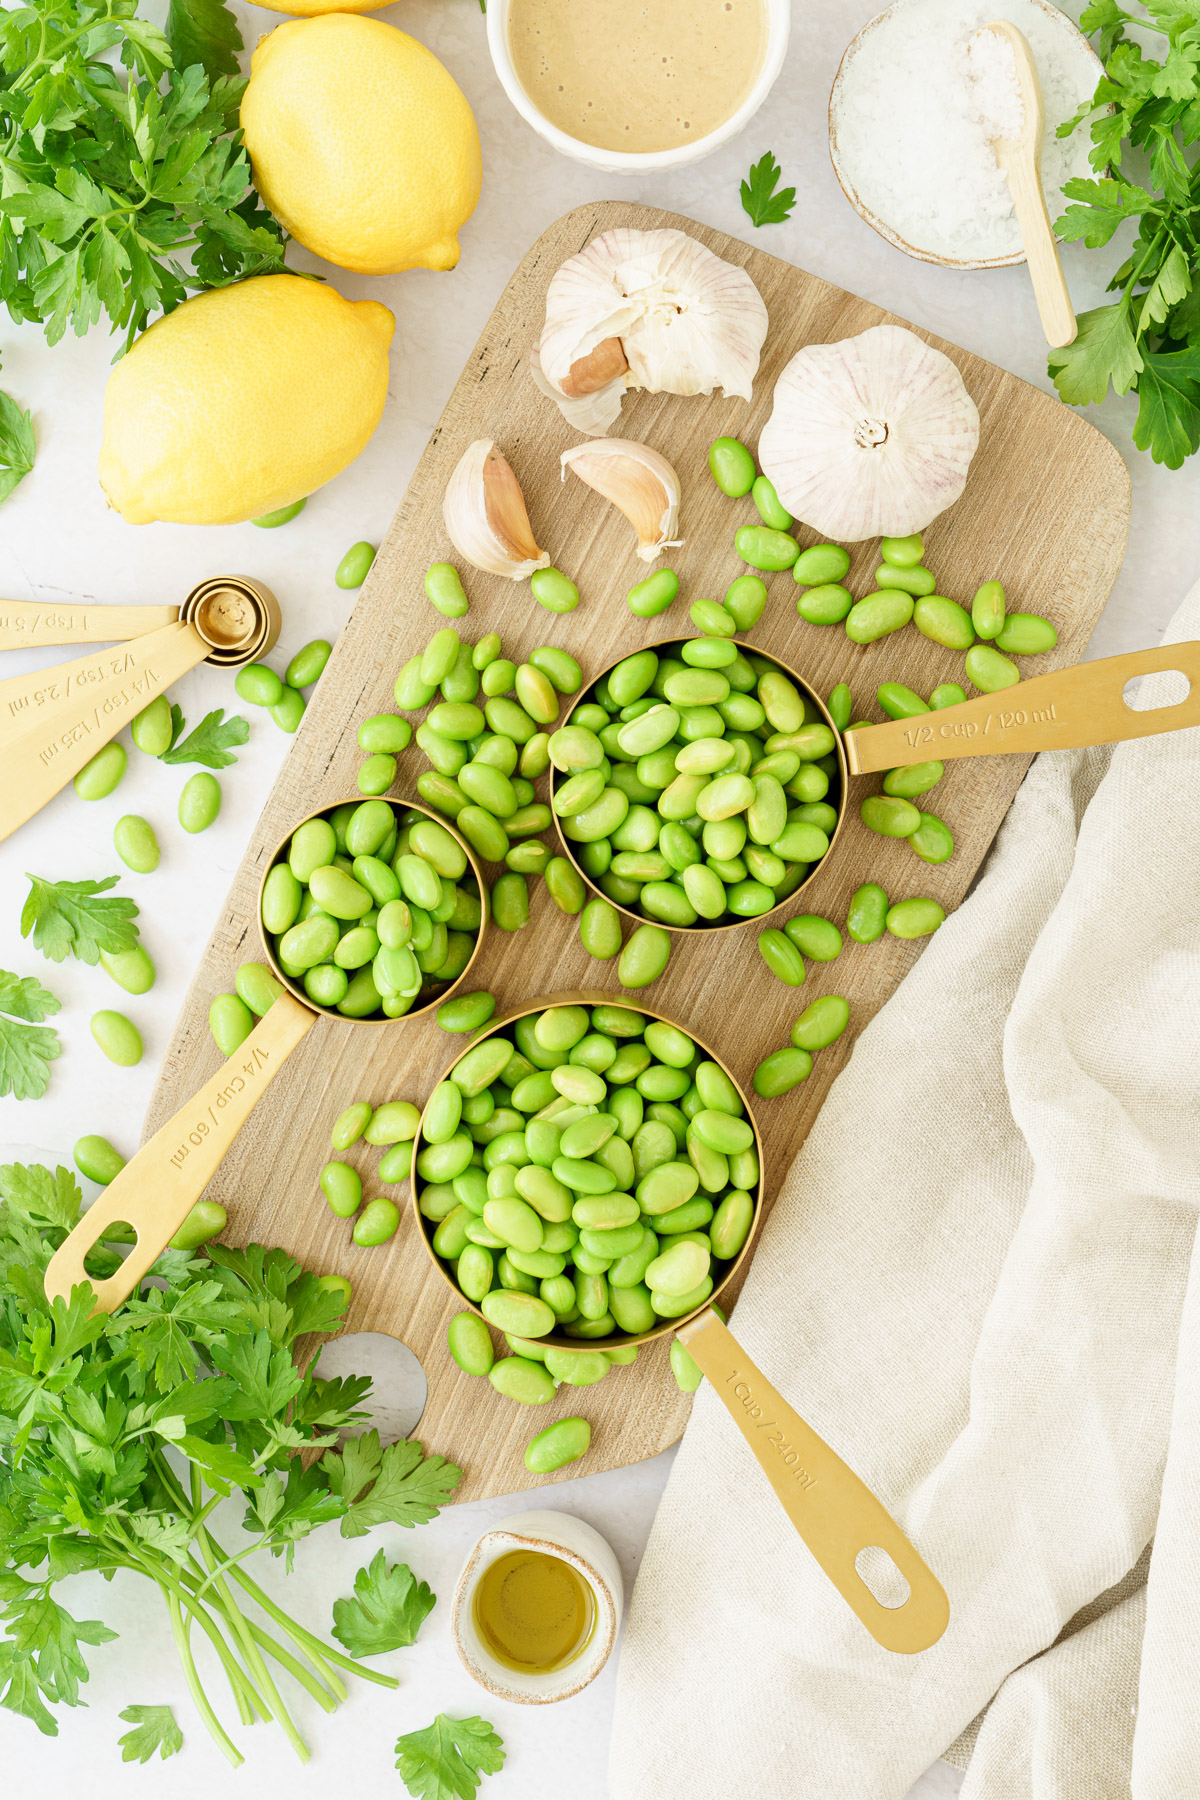 top view image of edamame ingredients scattered on top of the table